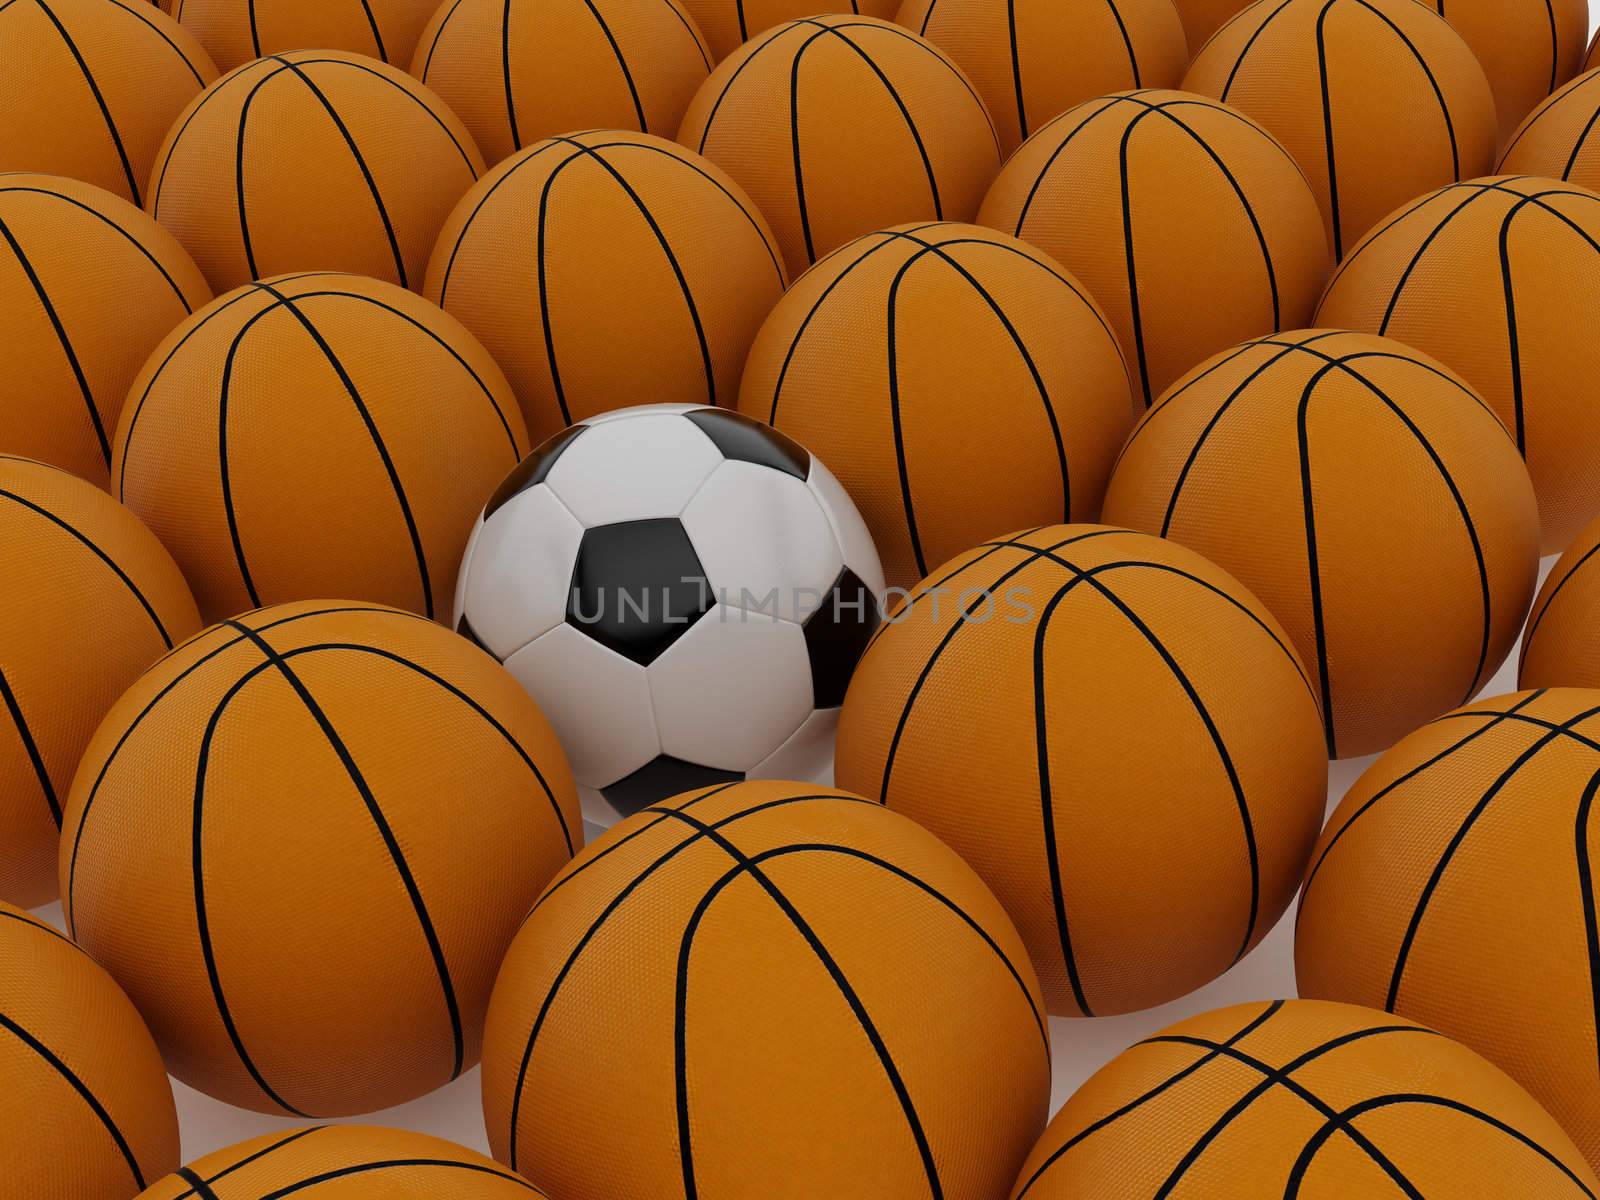 Football and basketball balls. 3d illustration on the  white background.